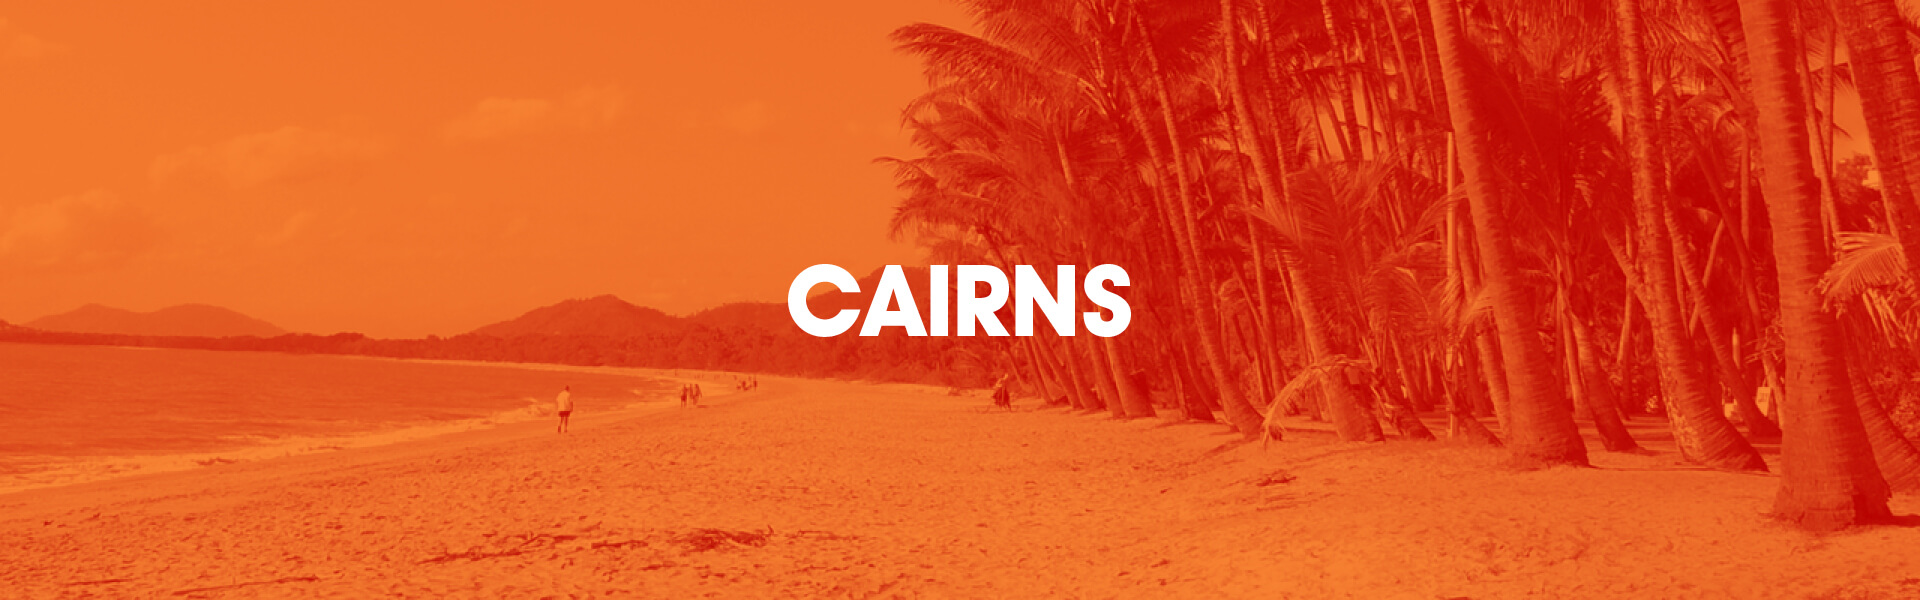 Learn More About Cairns Advertising Opportunities